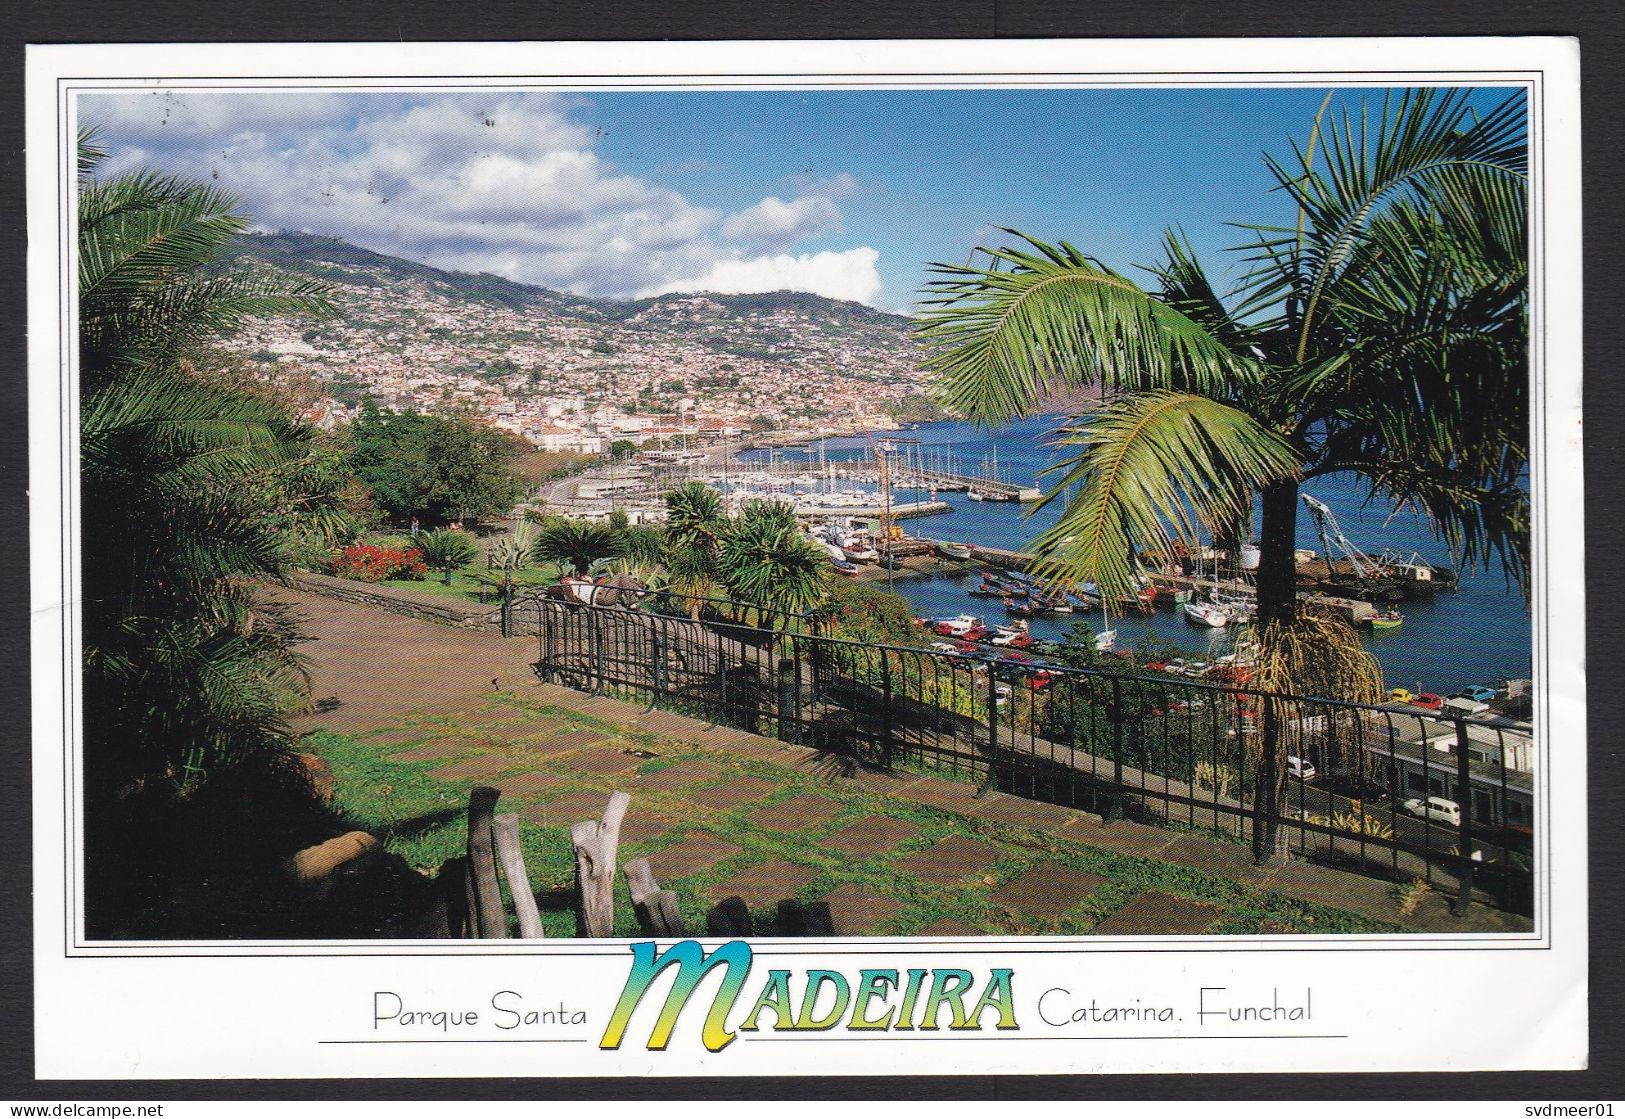 Portugal: Picture Postcard To Germany, 2002, 2 Stamps, Bird, Coin, Money, Card: Funchal Madeira (minor Crease) - Briefe U. Dokumente